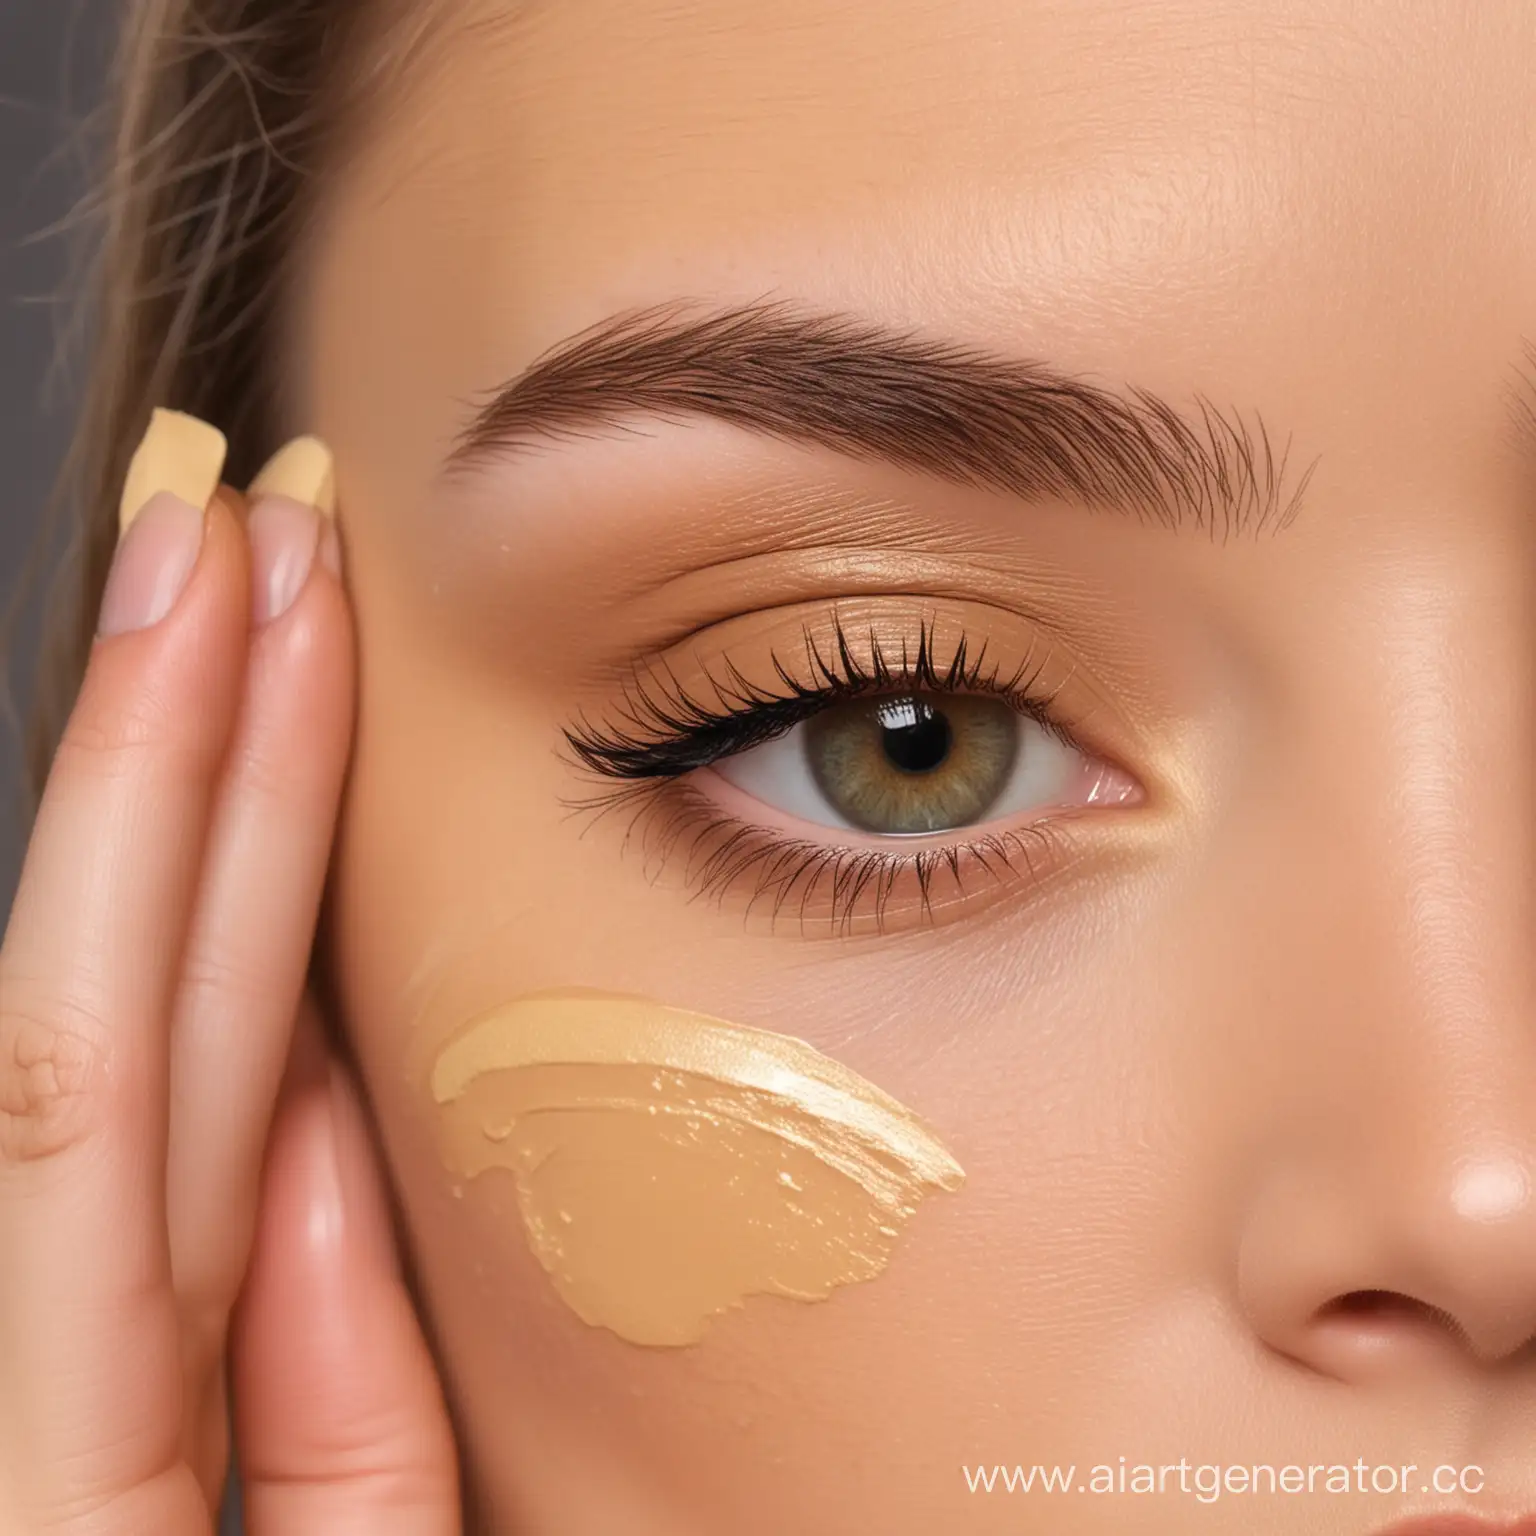 Youthful-Radiant-Makeup-Teen-Girl-Concealing-Dark-Circles-with-FENNEL-Beige-Concealer